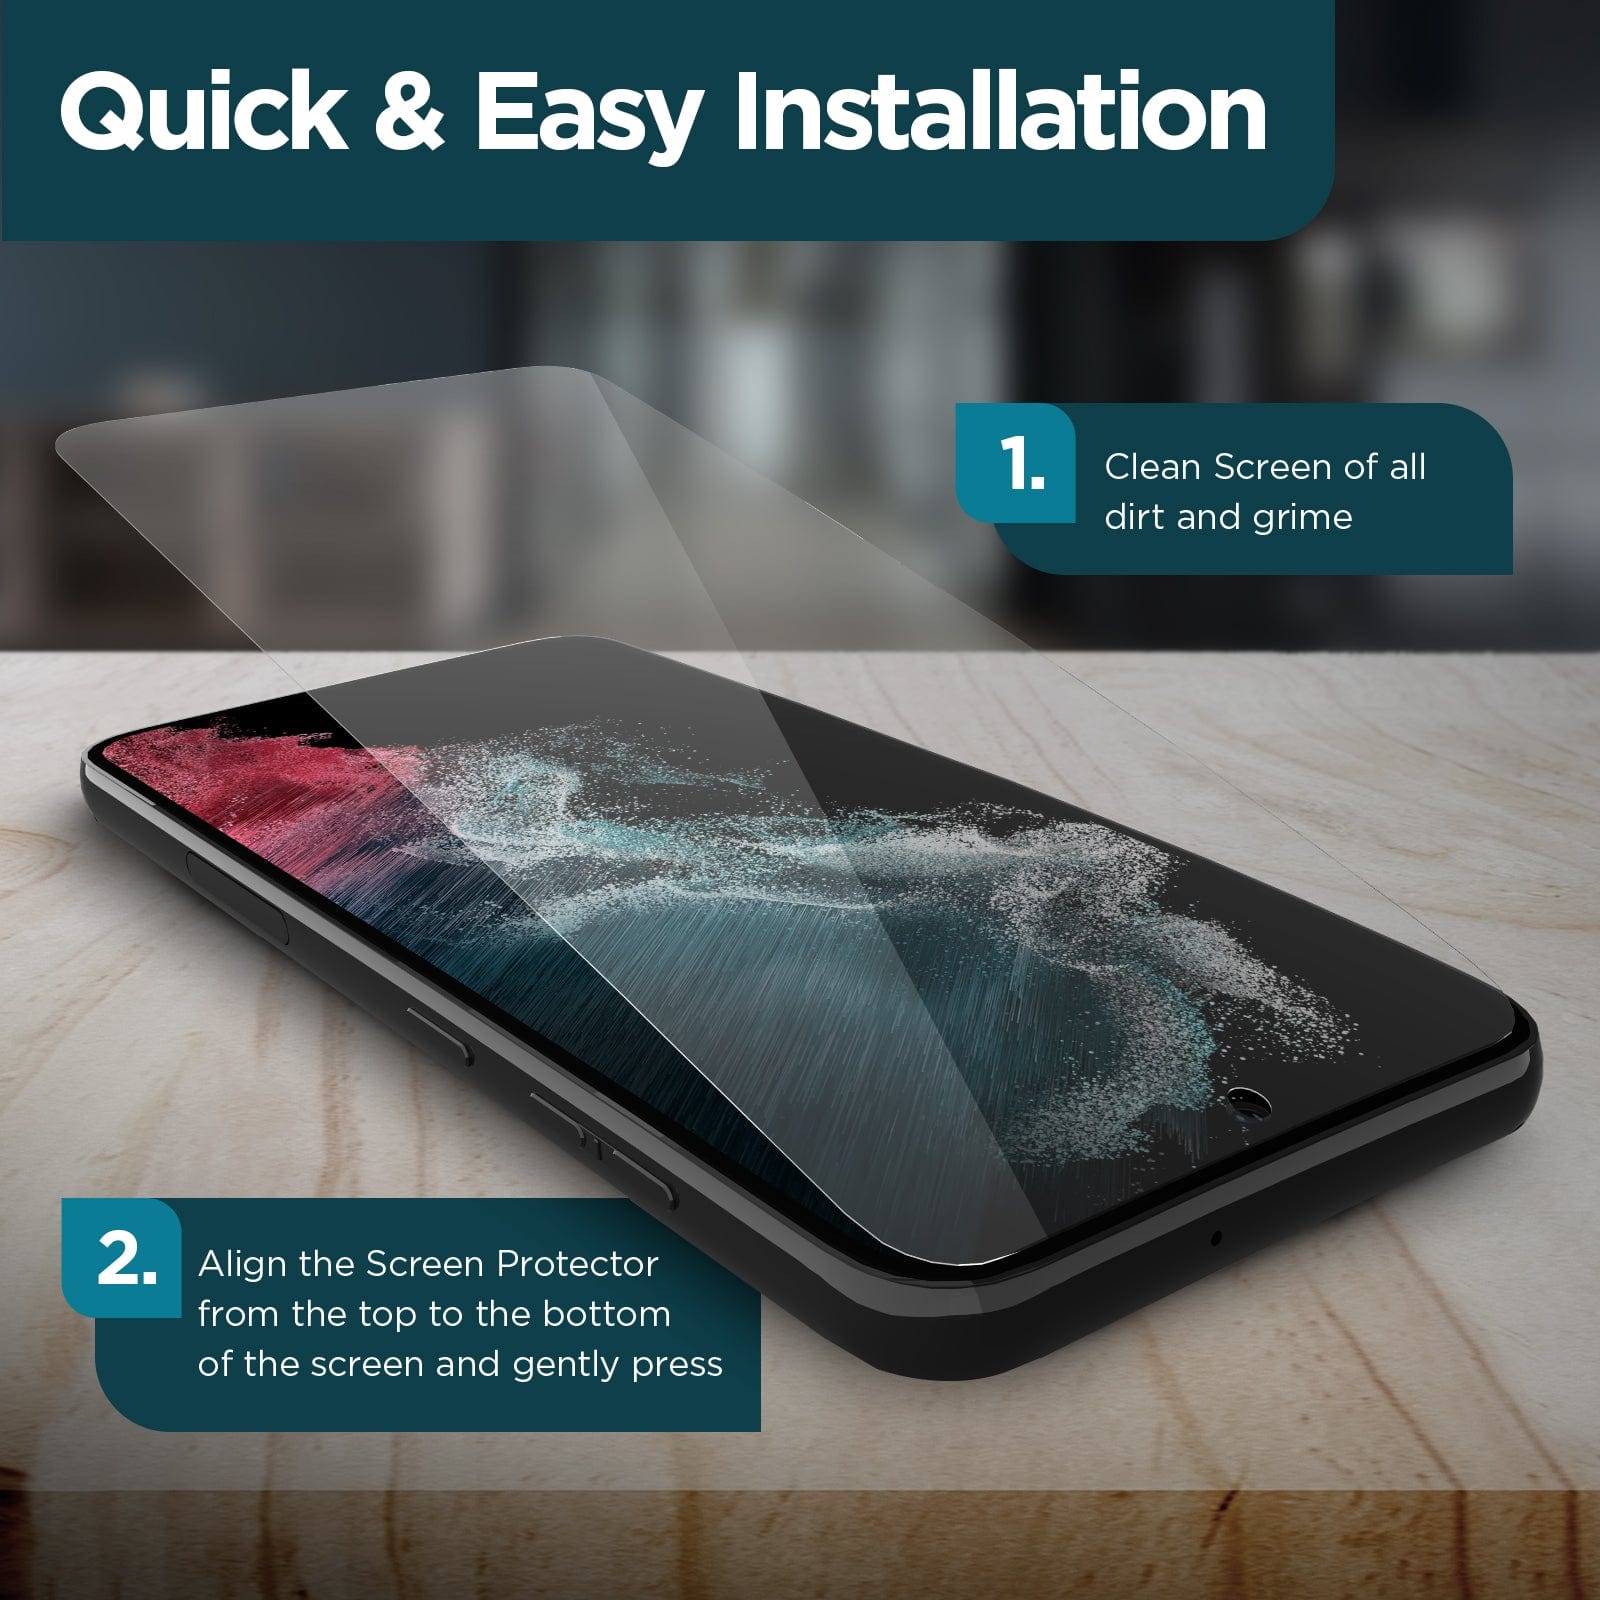 TOUCH SENSITIVITY. THE ULTRA SLIM DESIGN MAINTAINS THE ORIGINAL TOUCH RESPONSE SENSITIVITY. SCRATCH RESISTANT SCREEN PROTECTOR PREVENTS ABRASIONS AND SCRATCHING FROM SHARP OBJECTS.